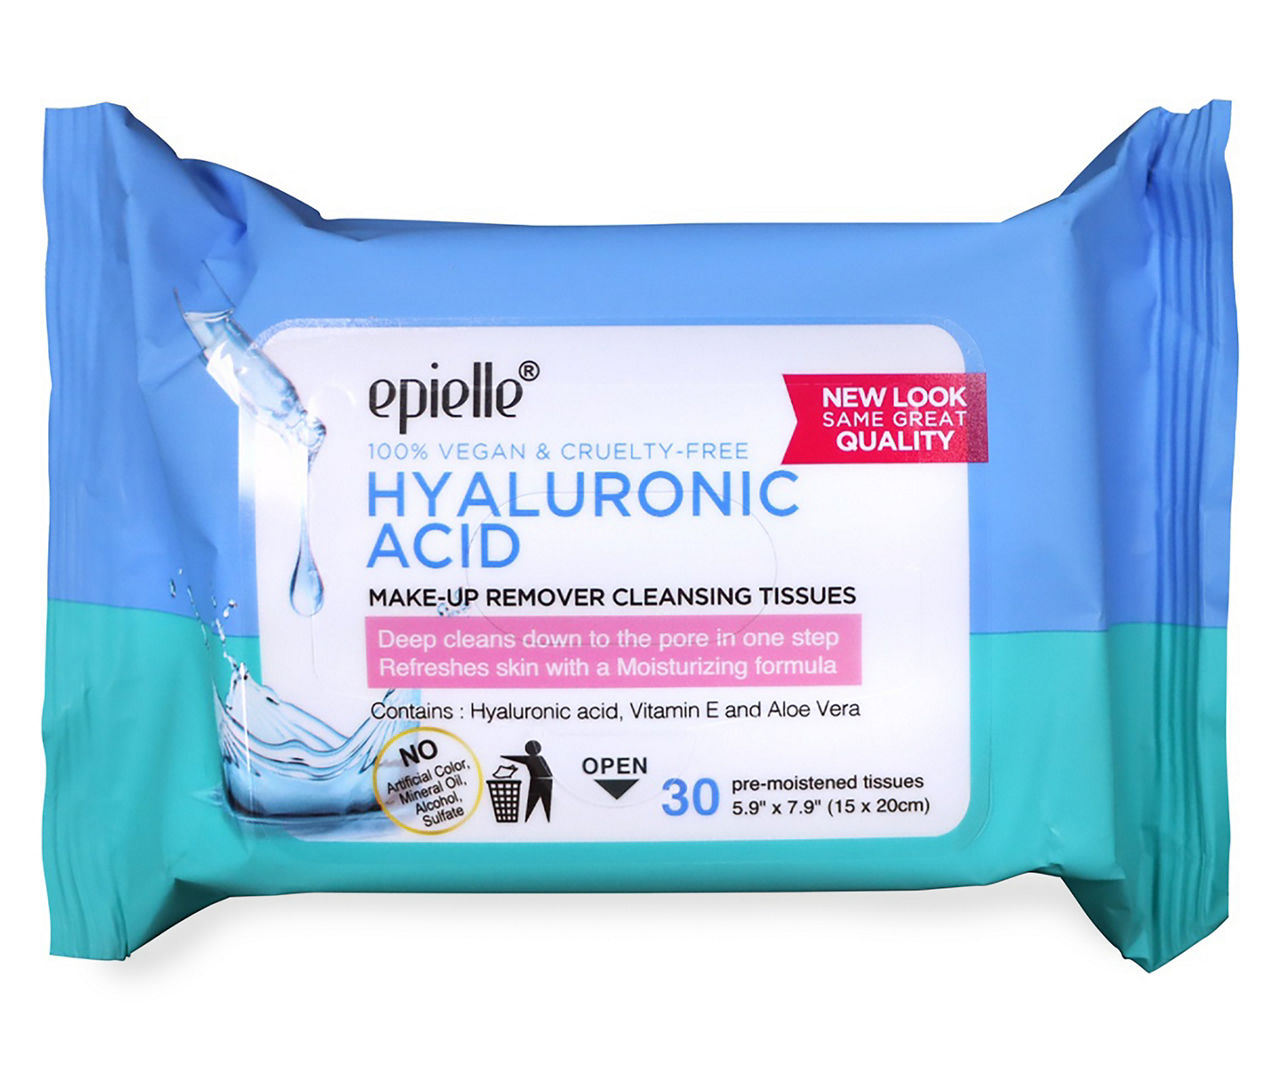 Hyaluronic Acid Makeup Remover Tissues, 30-Count